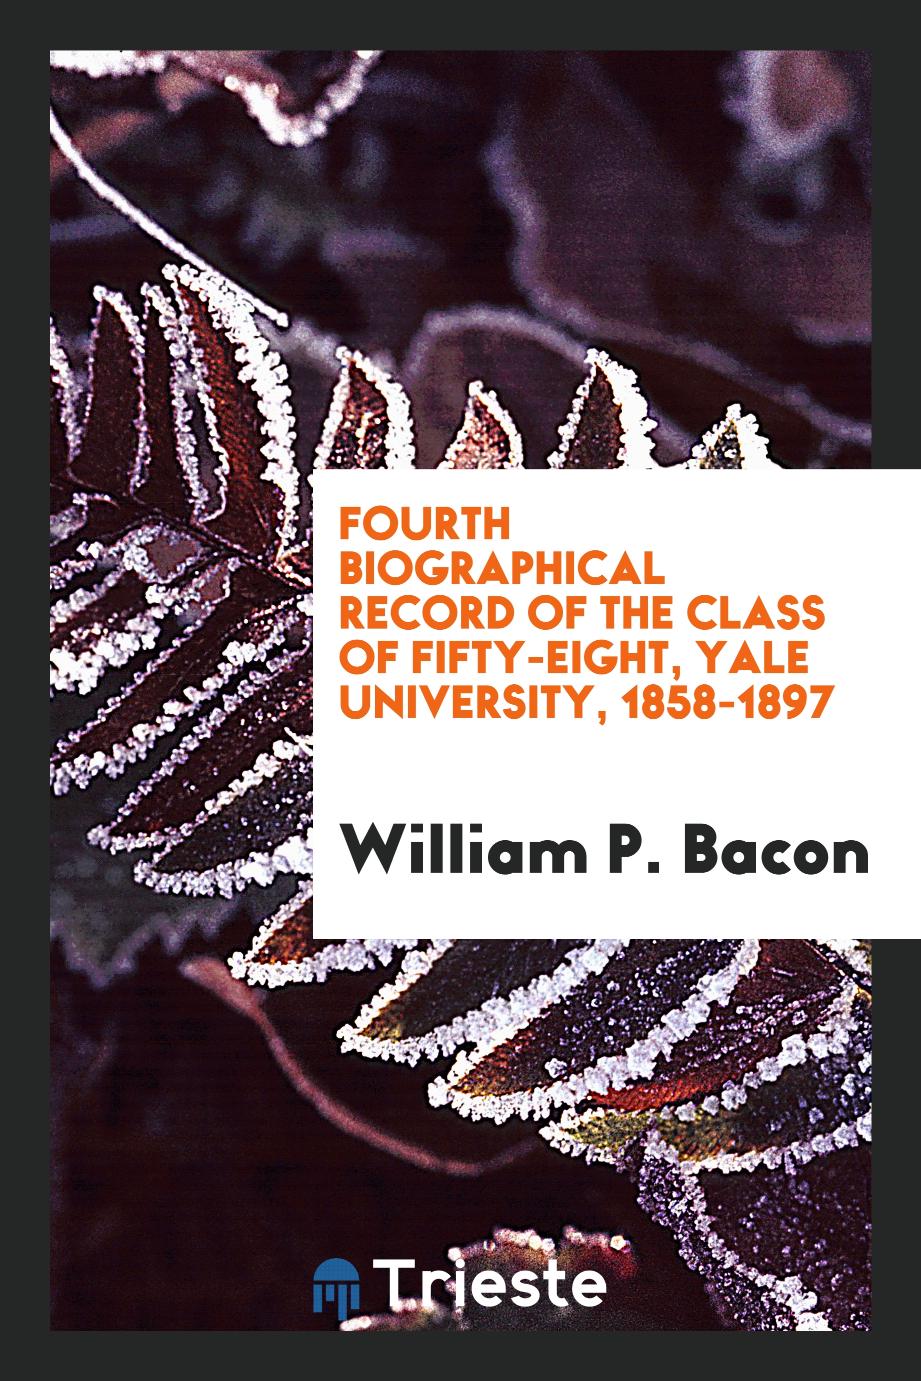 Fourth Biographical Record of the Class of Fifty-Eight, Yale University, 1858-1897